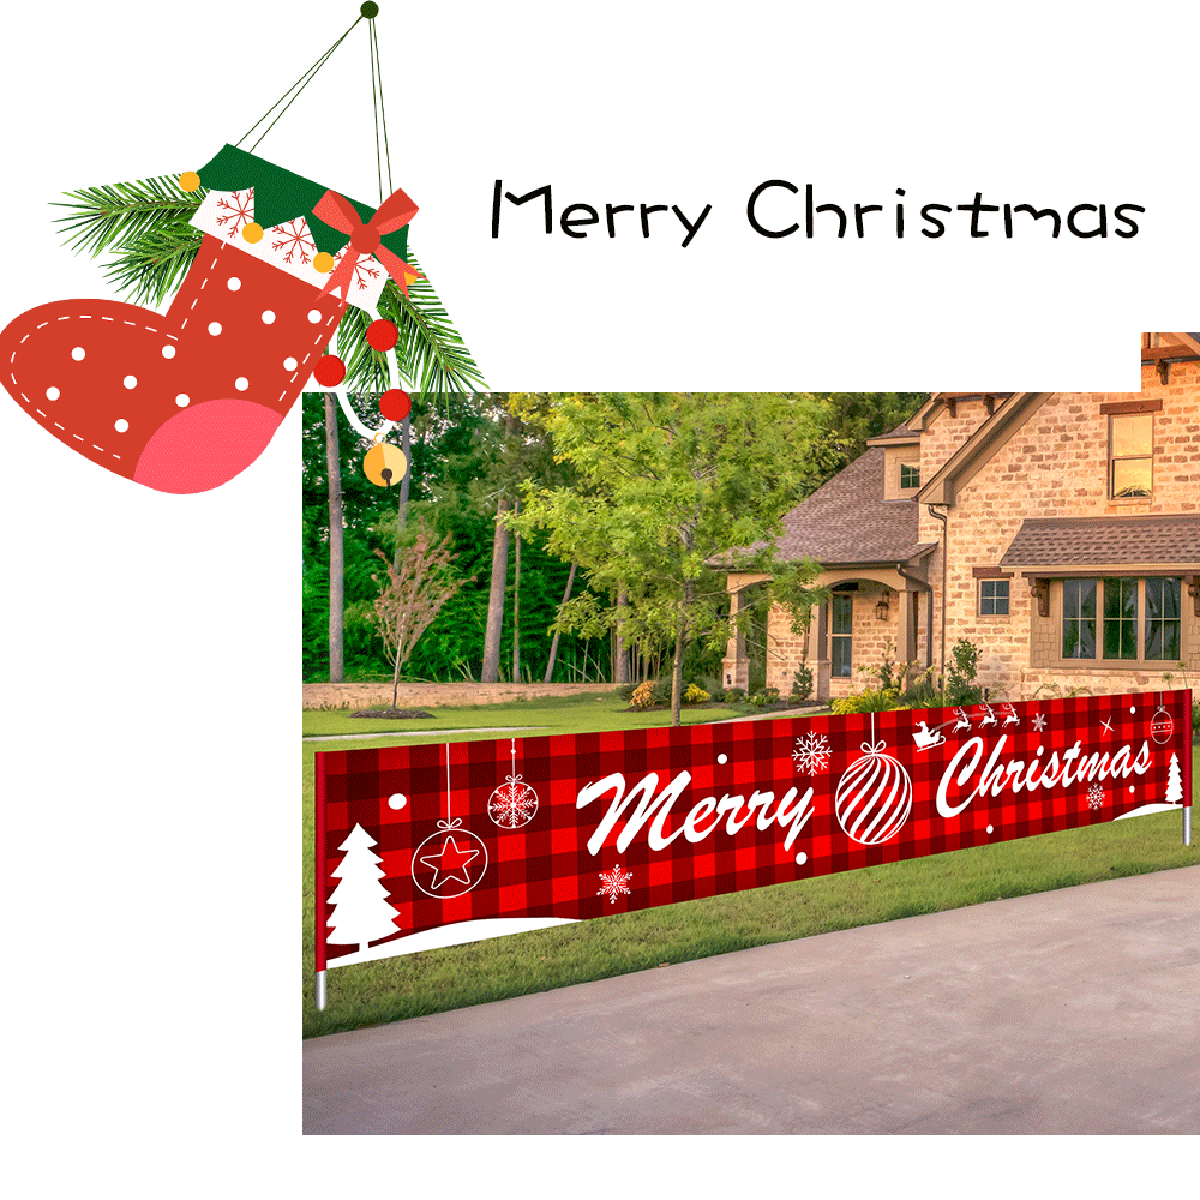 3M-Merry-Christmas-Outdoor-Banner-Oxford-Large-Hanging-Bunting-Xmas-Door-Wall-Decoration-Photography-1764541-3